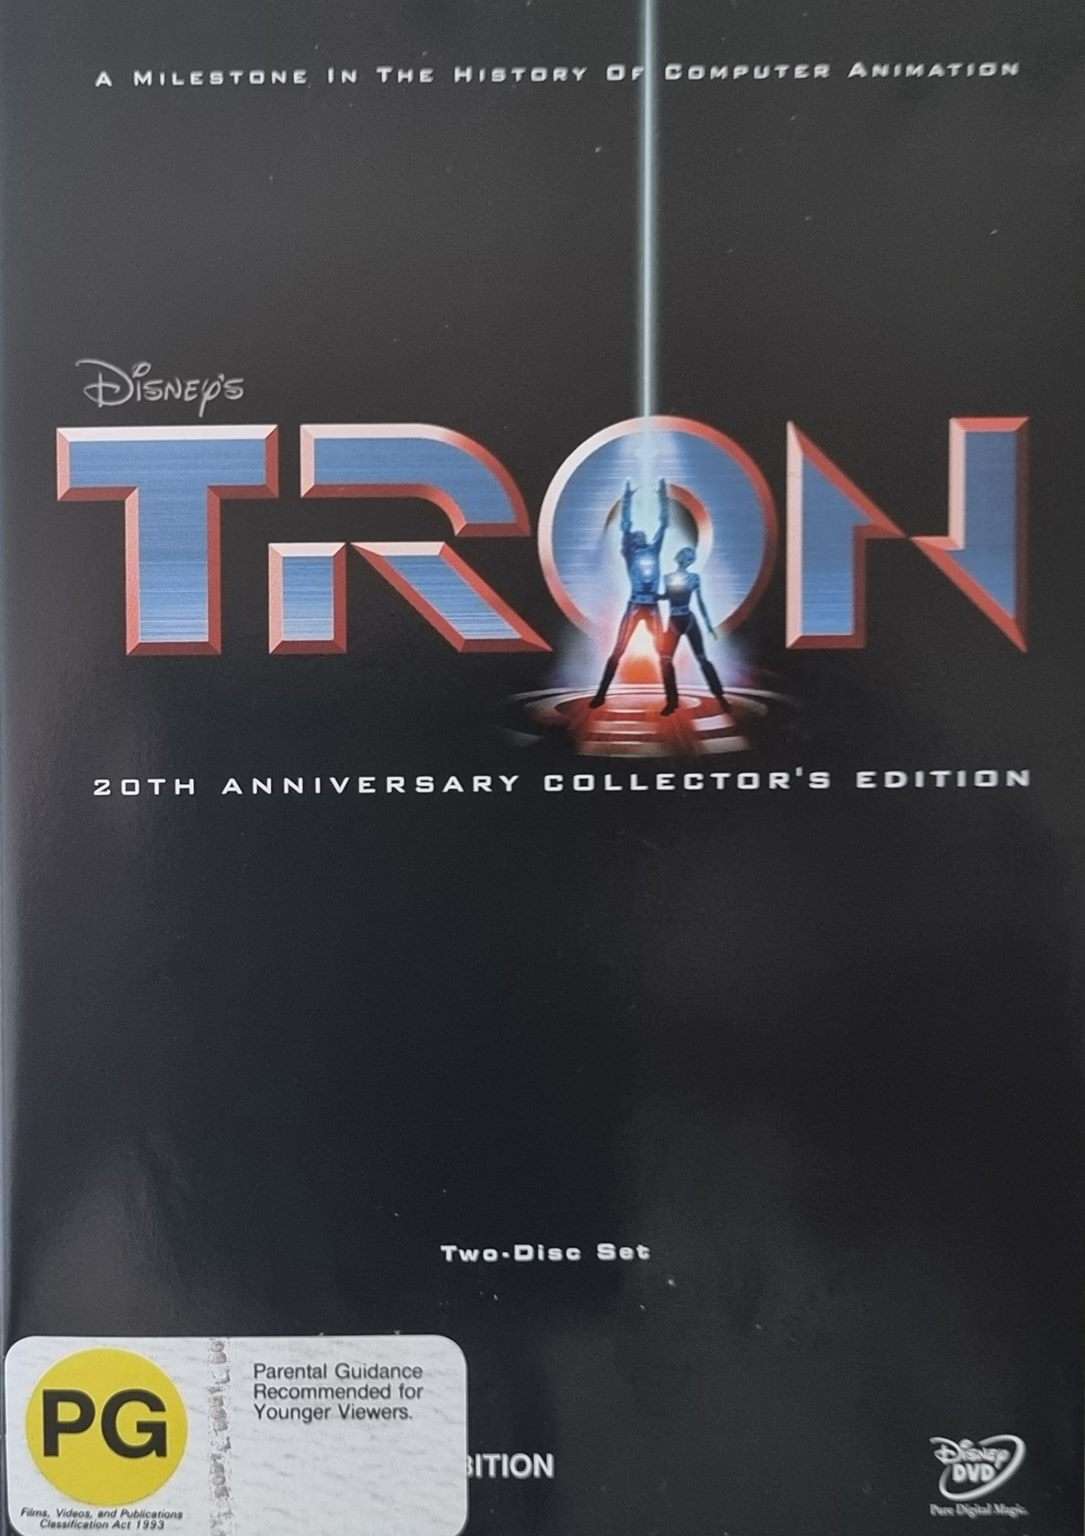 Tron: The Original Classic 2 Disc Collector's Edition